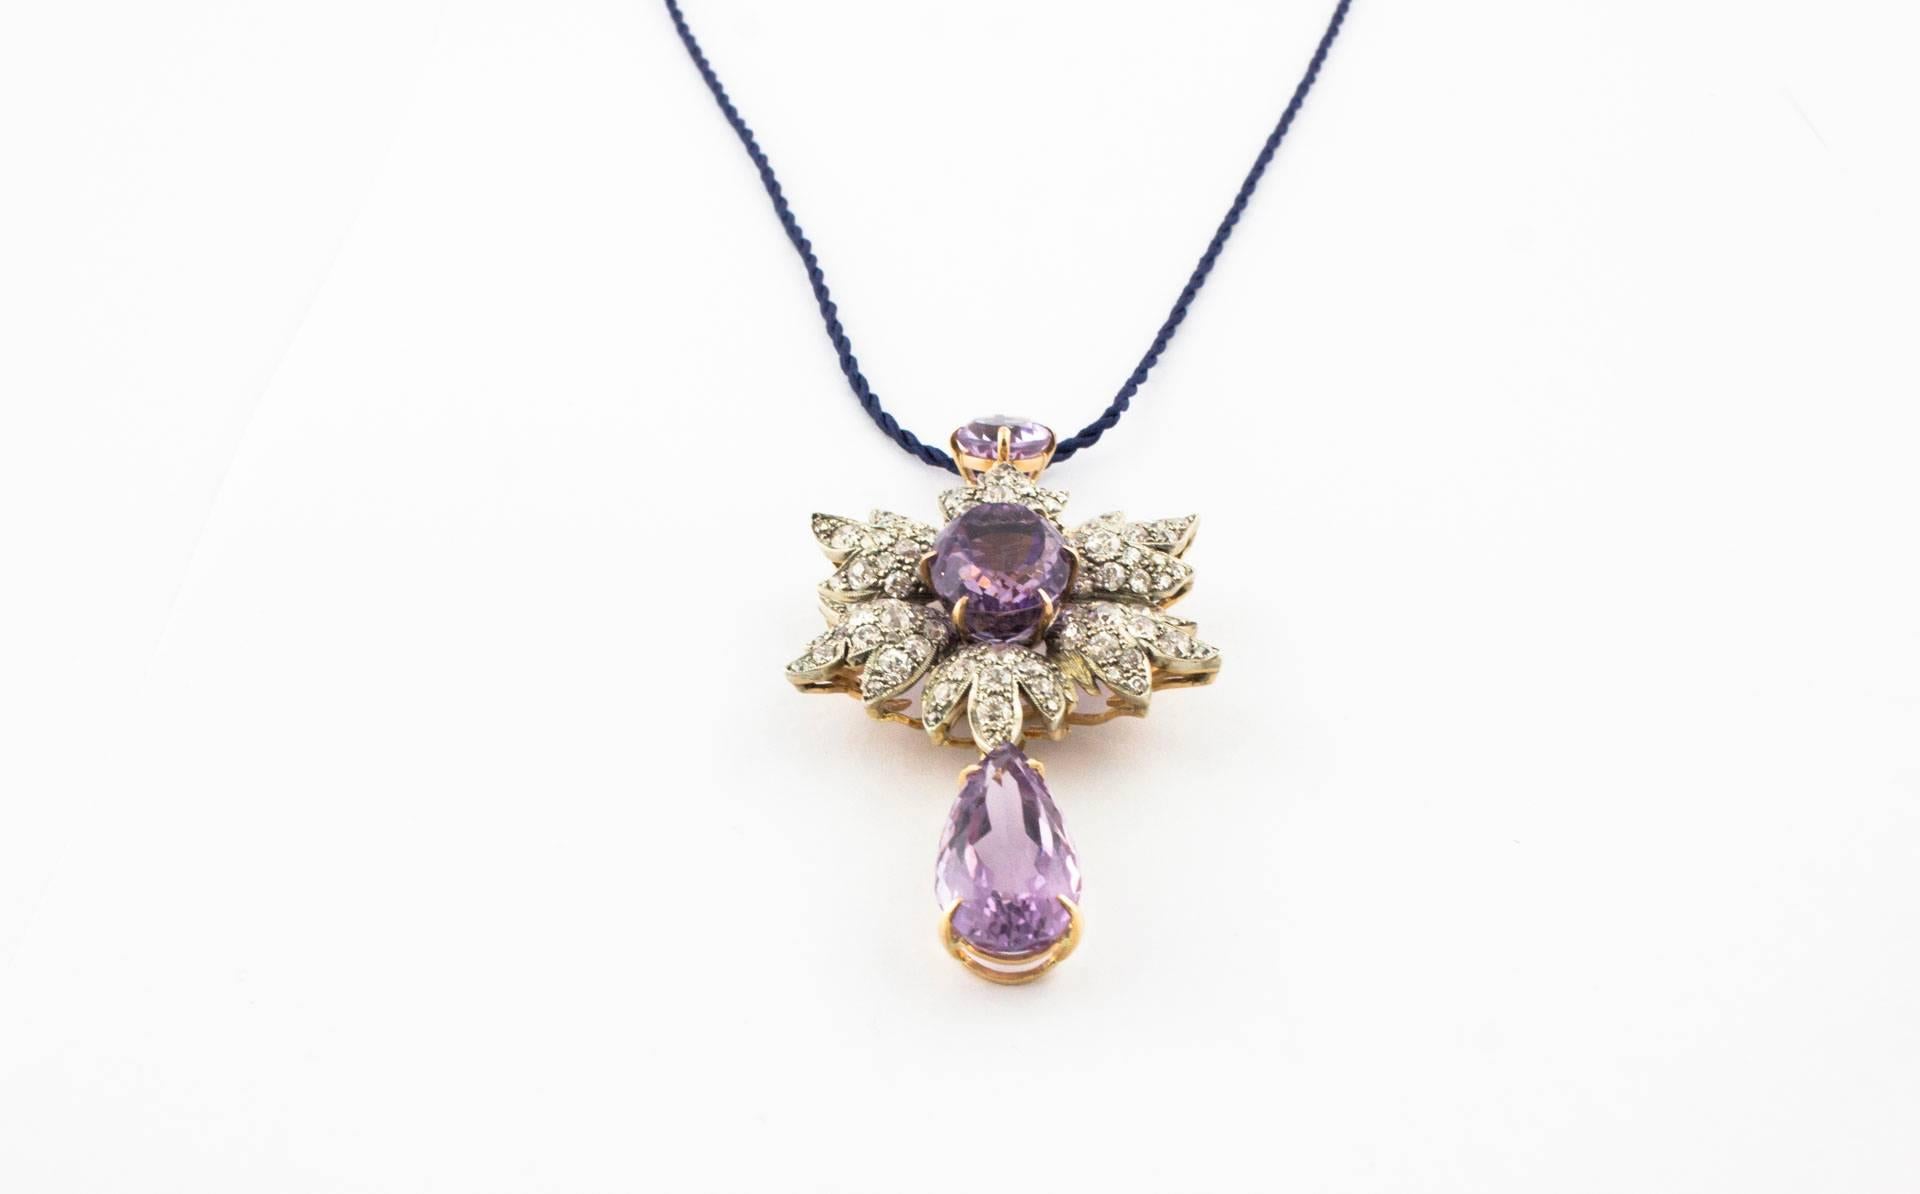 Women's or Men's Gold and Silver Diamonds Amethyst Pendant/Necklace For Sale